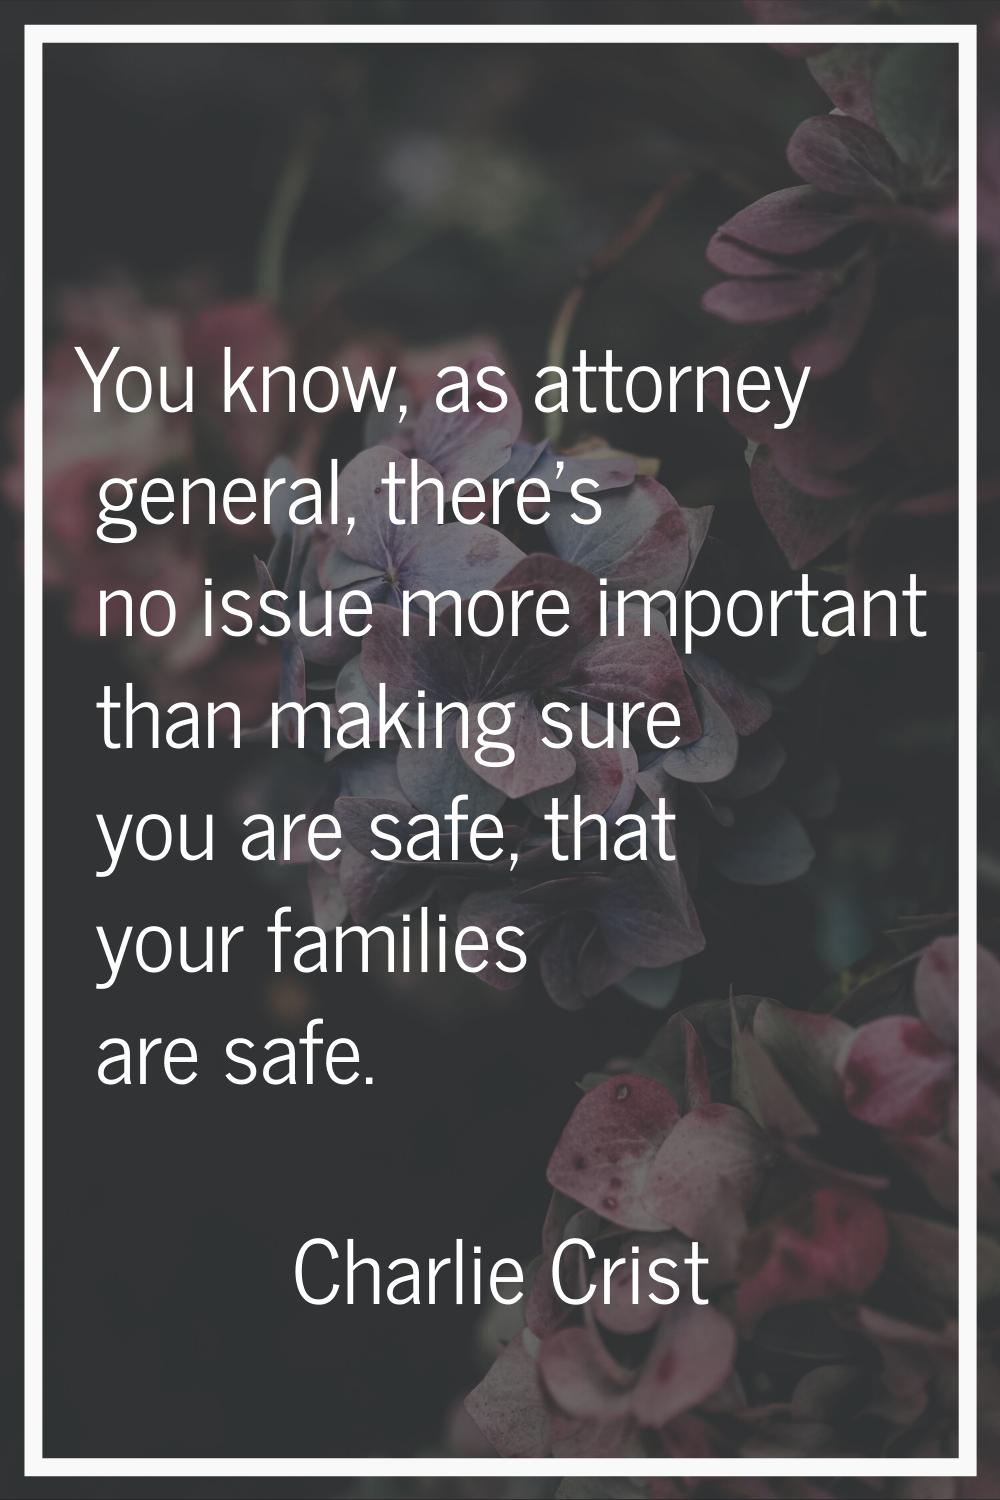 You know, as attorney general, there's no issue more important than making sure you are safe, that 